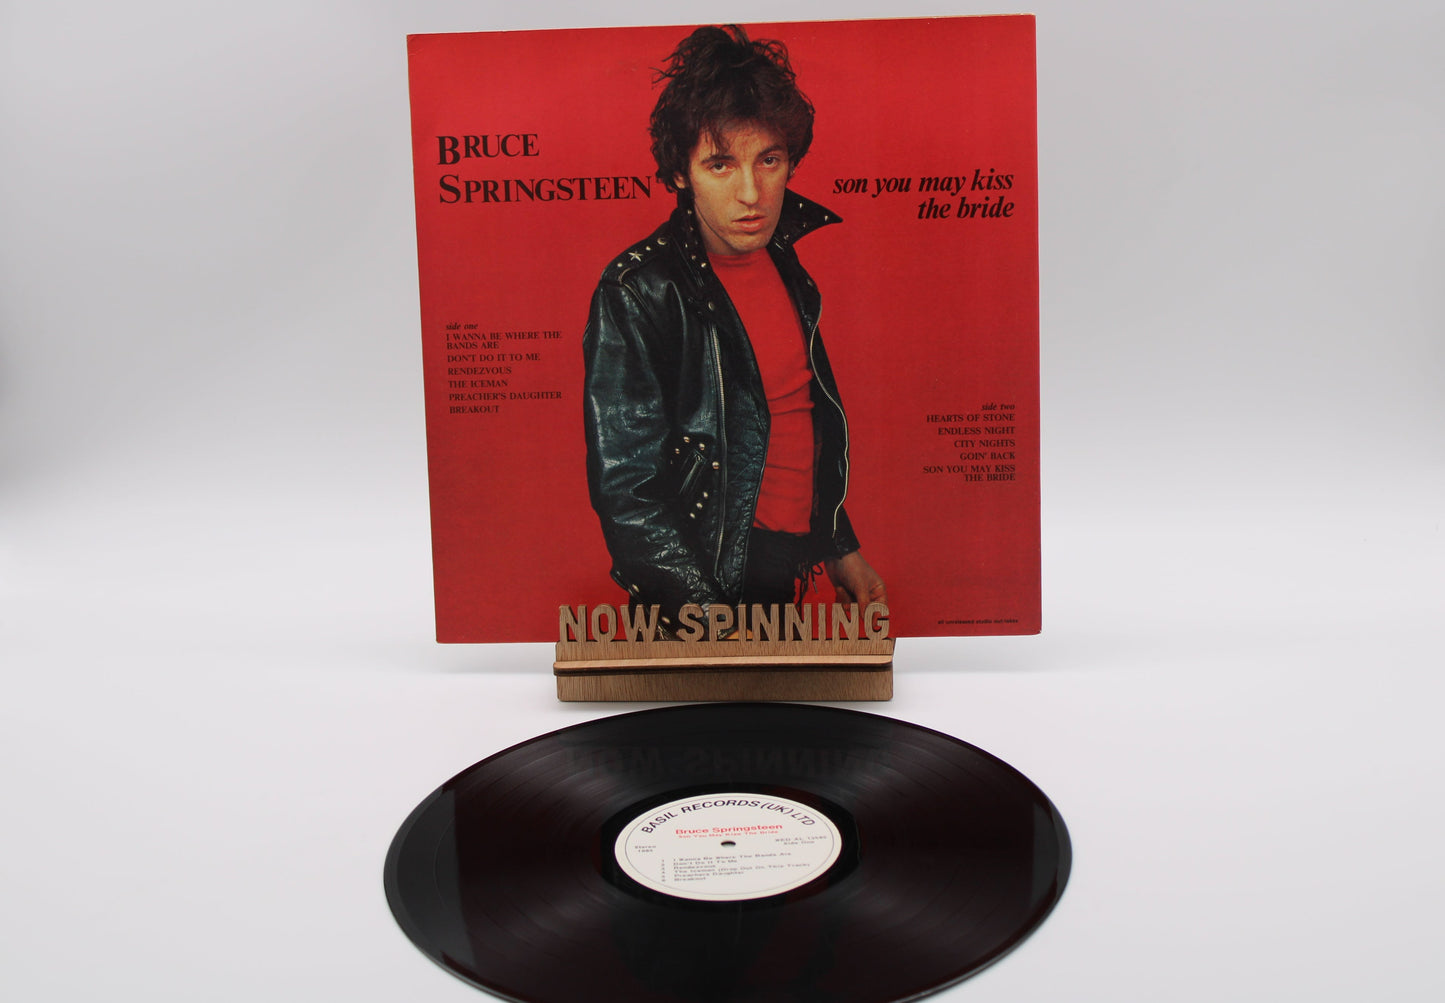 Bruce Springsteen - Son You May Kiss The Bride - LP 12" Unofficial Vinyl on Basil Records Near Mint